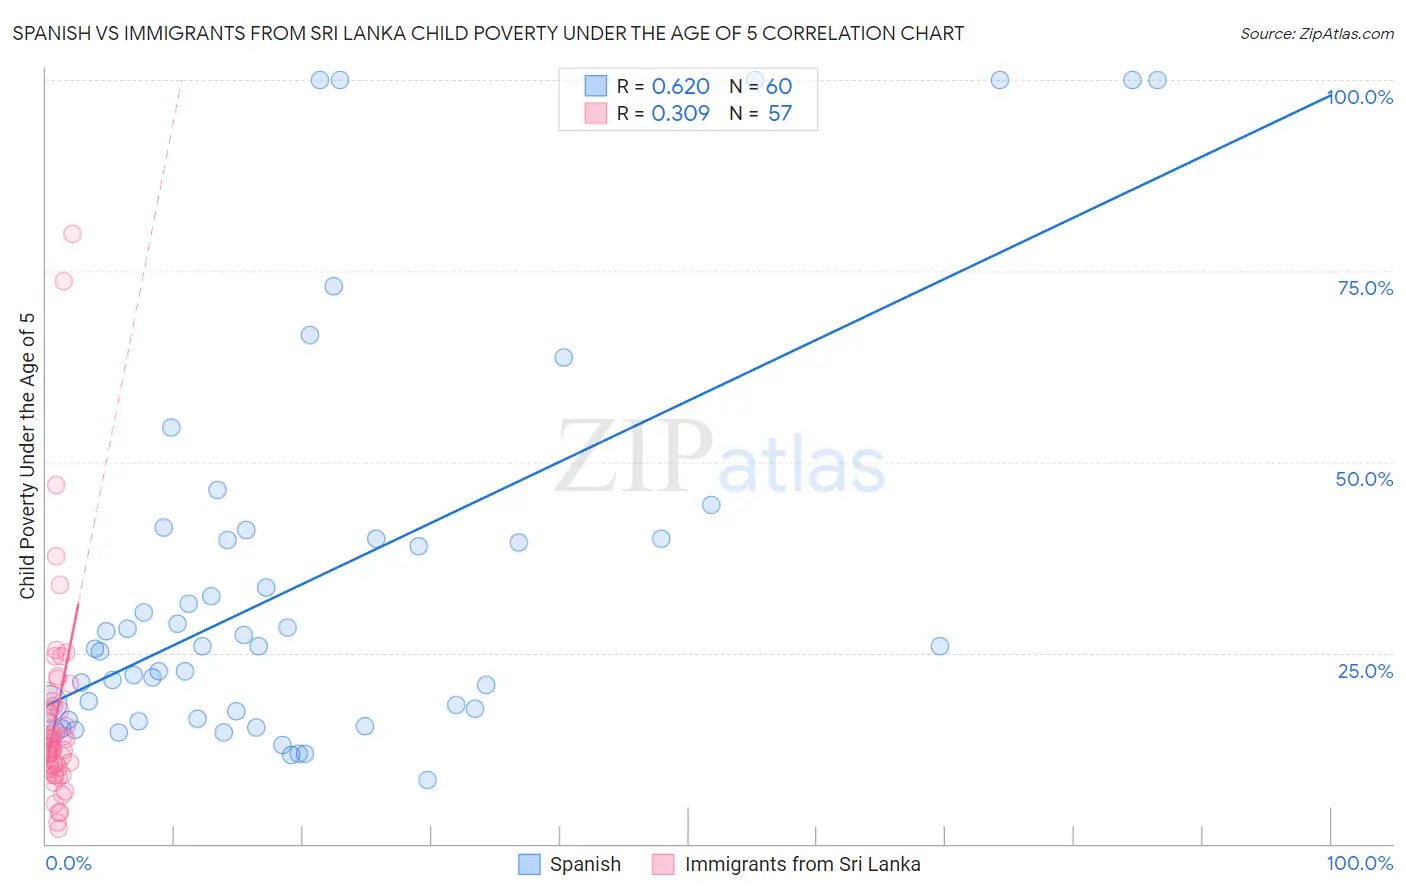 Spanish vs Immigrants from Sri Lanka Child Poverty Under the Age of 5